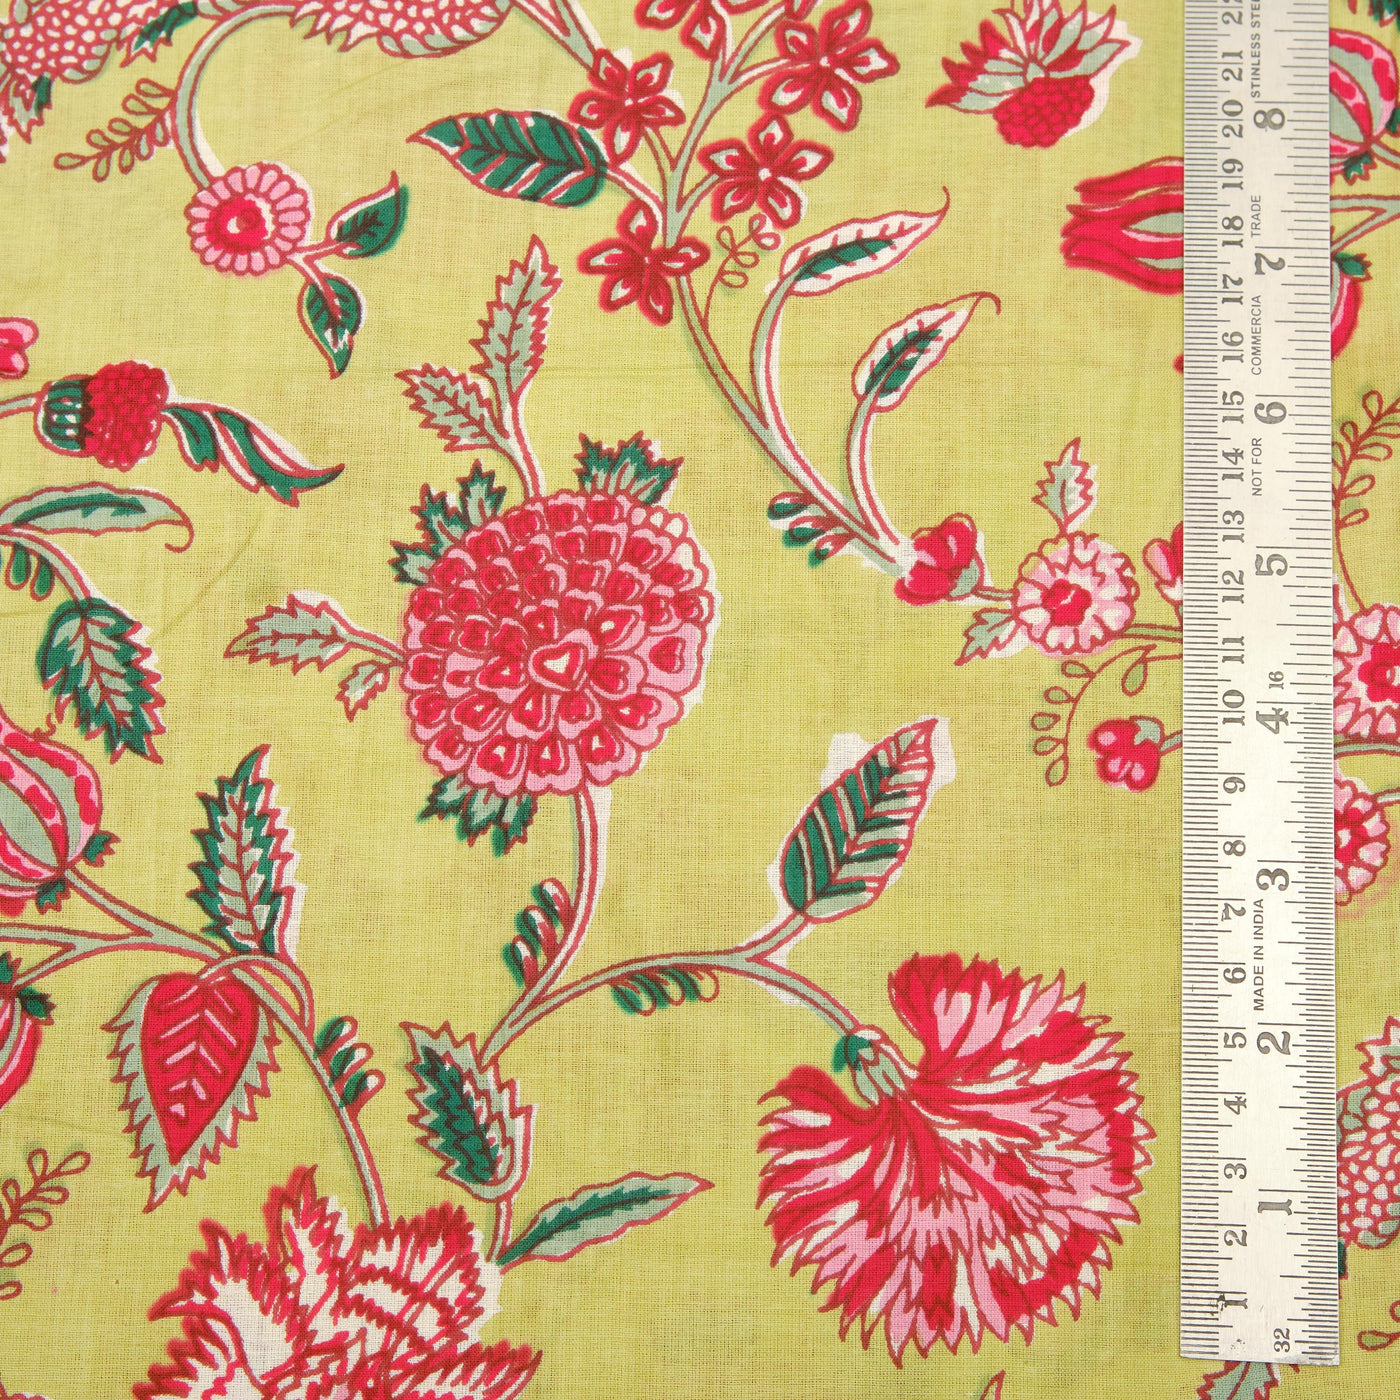 Fabricrush Flax Yellow, Ruby Red, Emerald Green Indian Floral Printed 100% Pure Cotton Cloth, Fabric by the Yard, Women's Clothing Curtains Pillows Bag